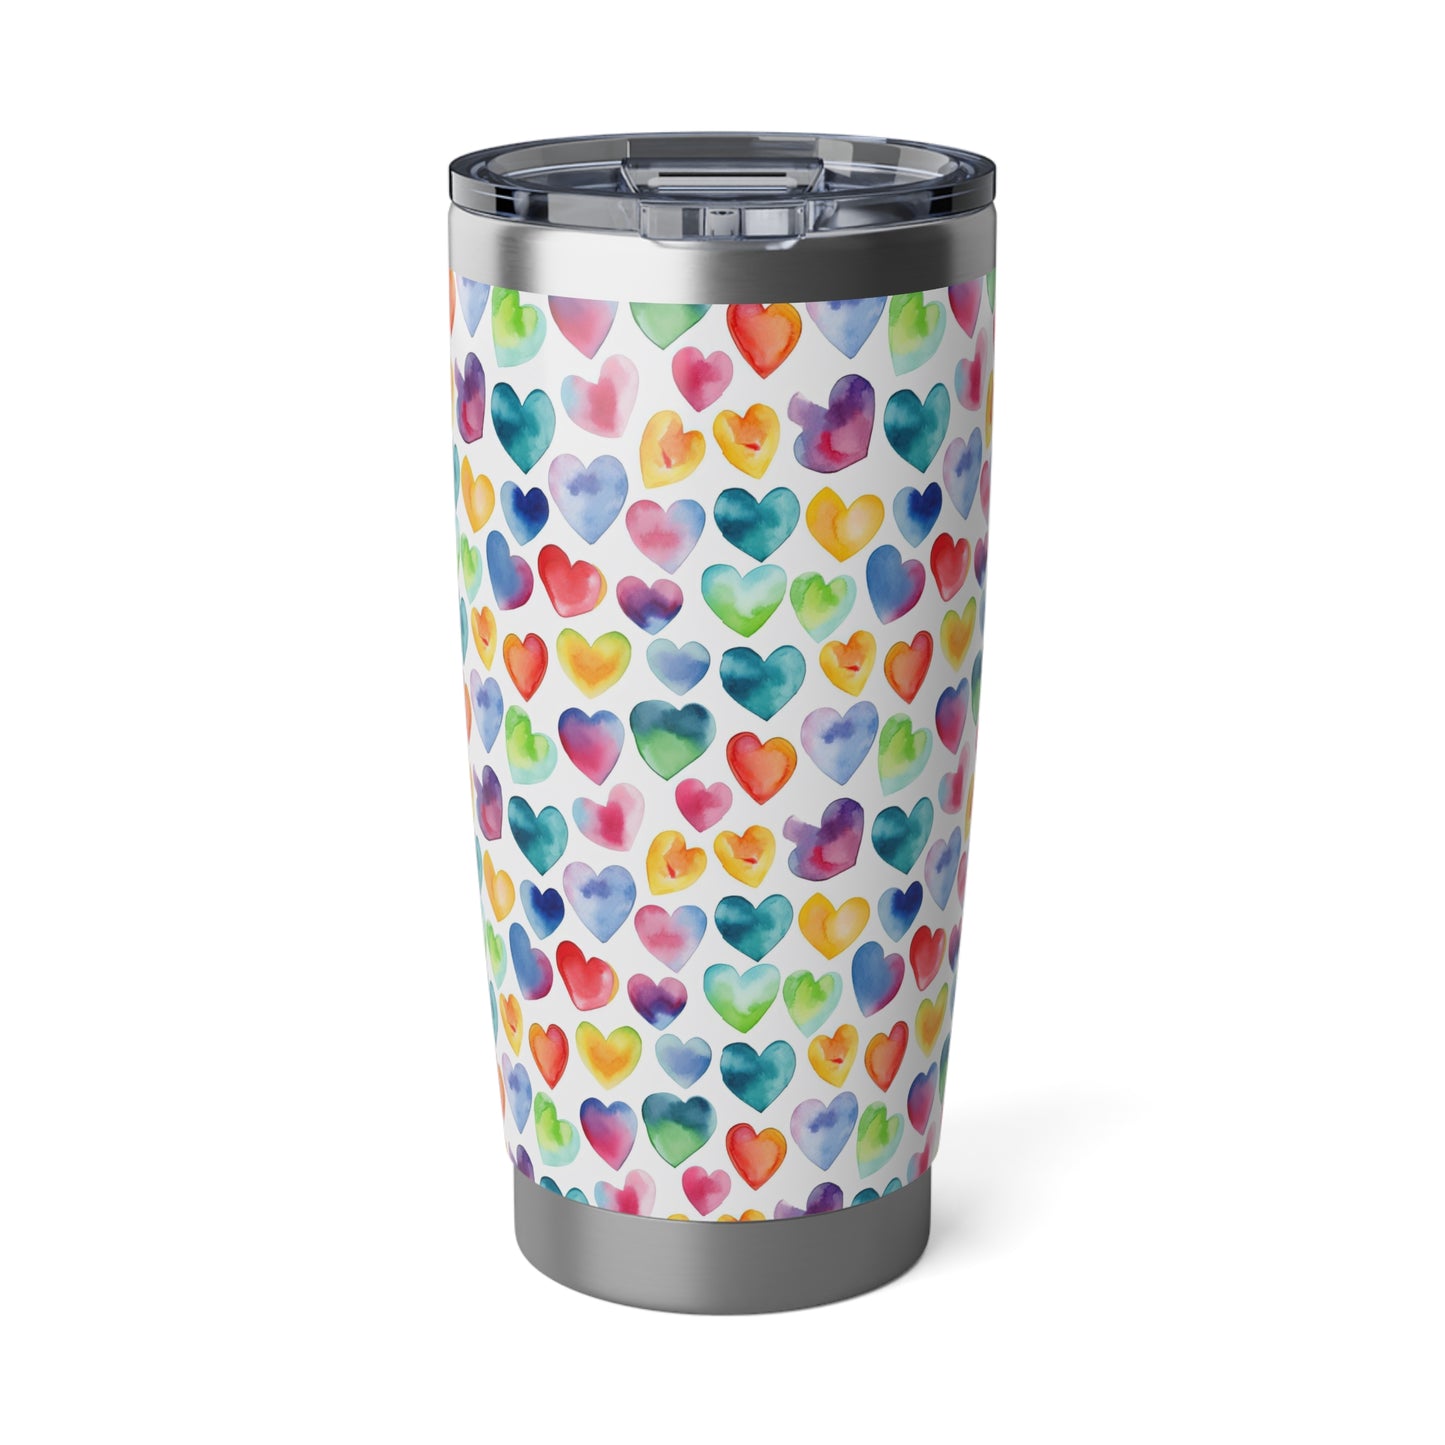 Watercolor Hearts - Rainbow - Multi - Vagabond 20oz Tumbler - Stainless Steel - Double Wall